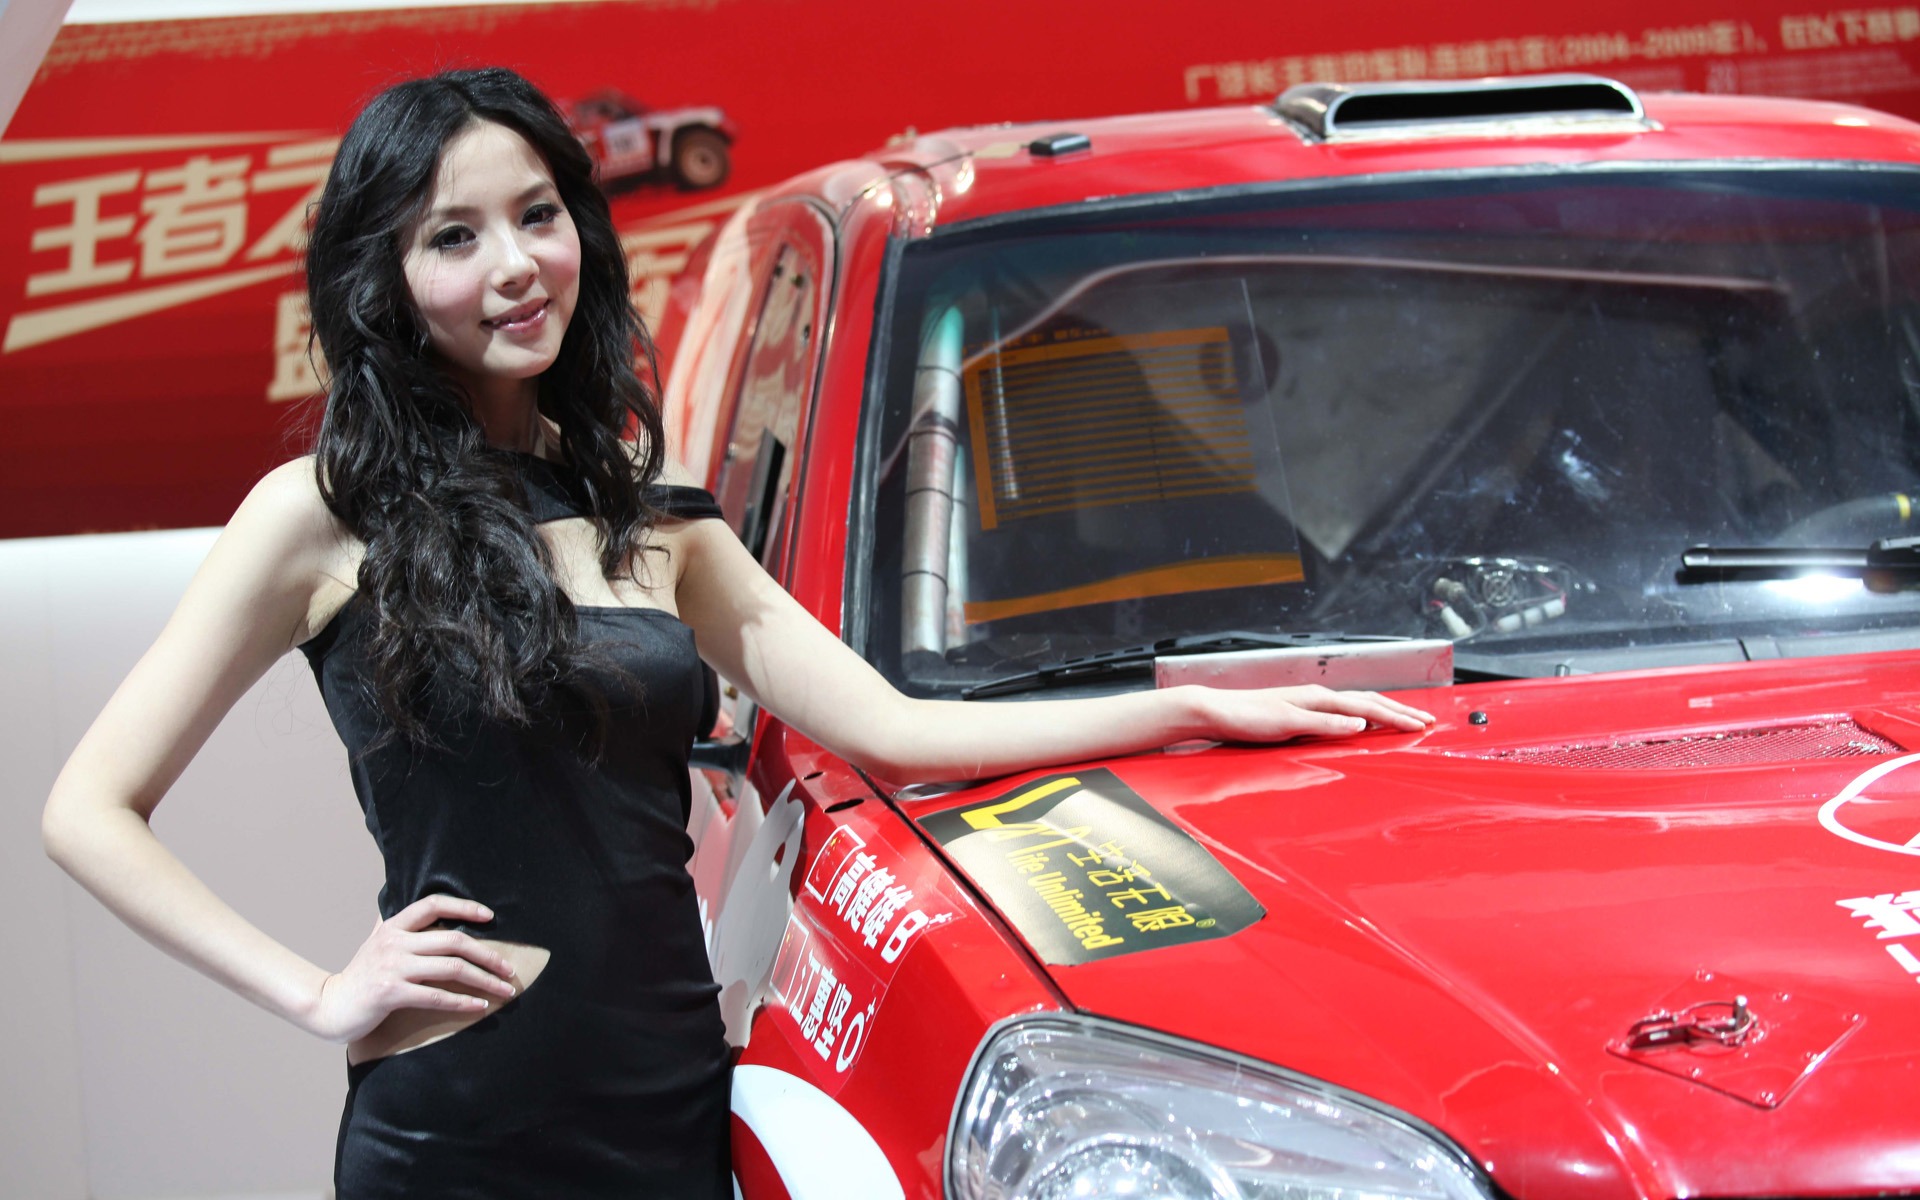 2010 Beijing International Auto Show beauty (1) (the wind chasing the clouds works) #32 - 1920x1200